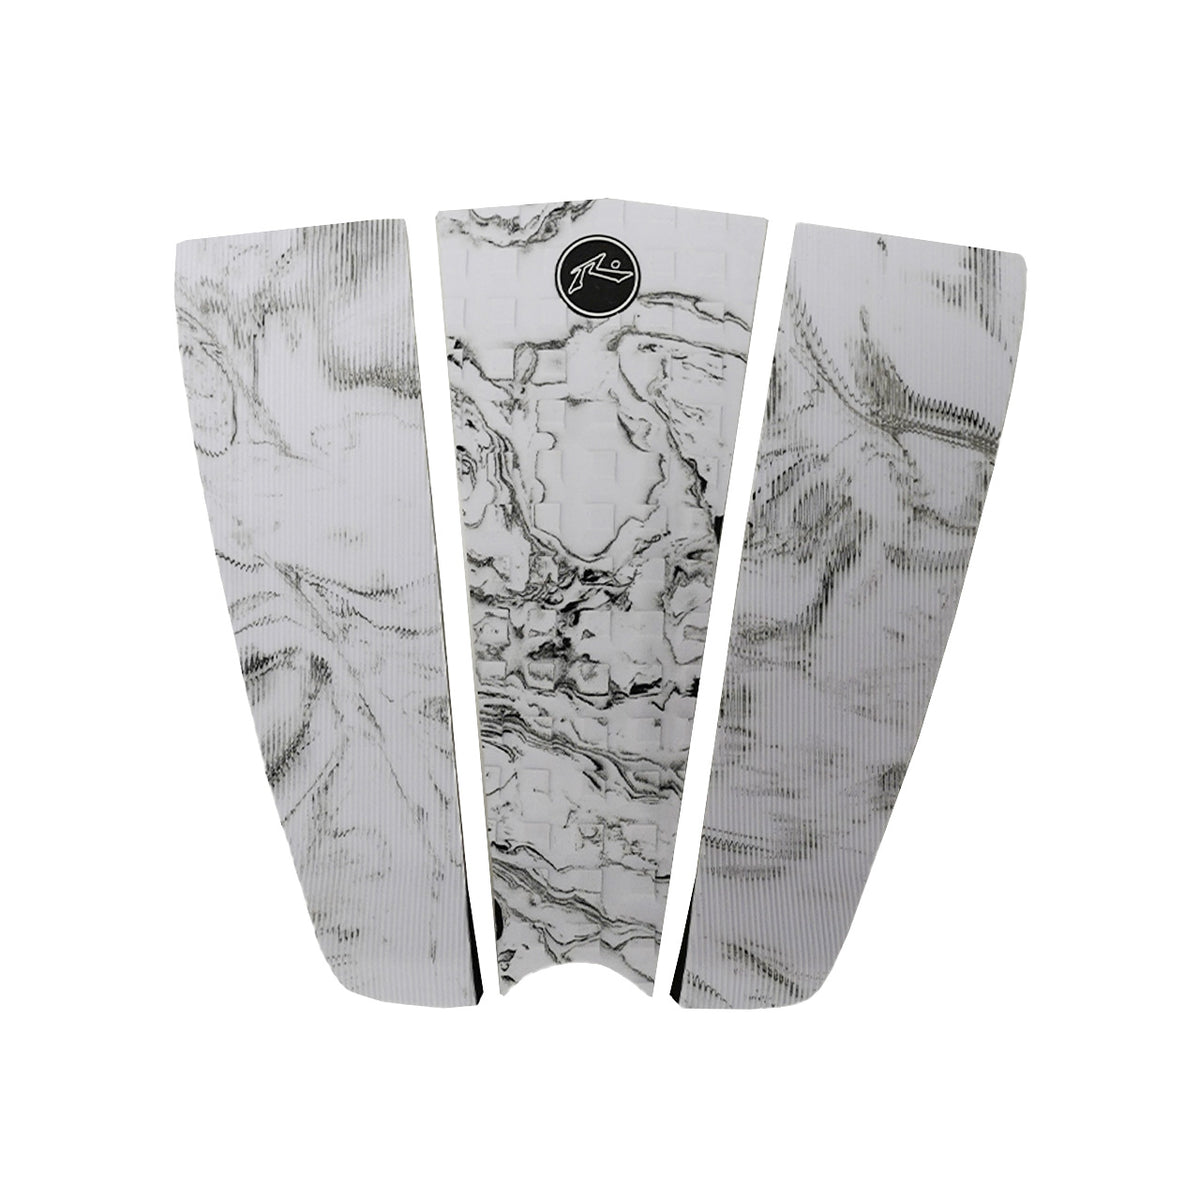 Squash Tail Traction Pad - Black and White Swirl - Rusty Surfboards